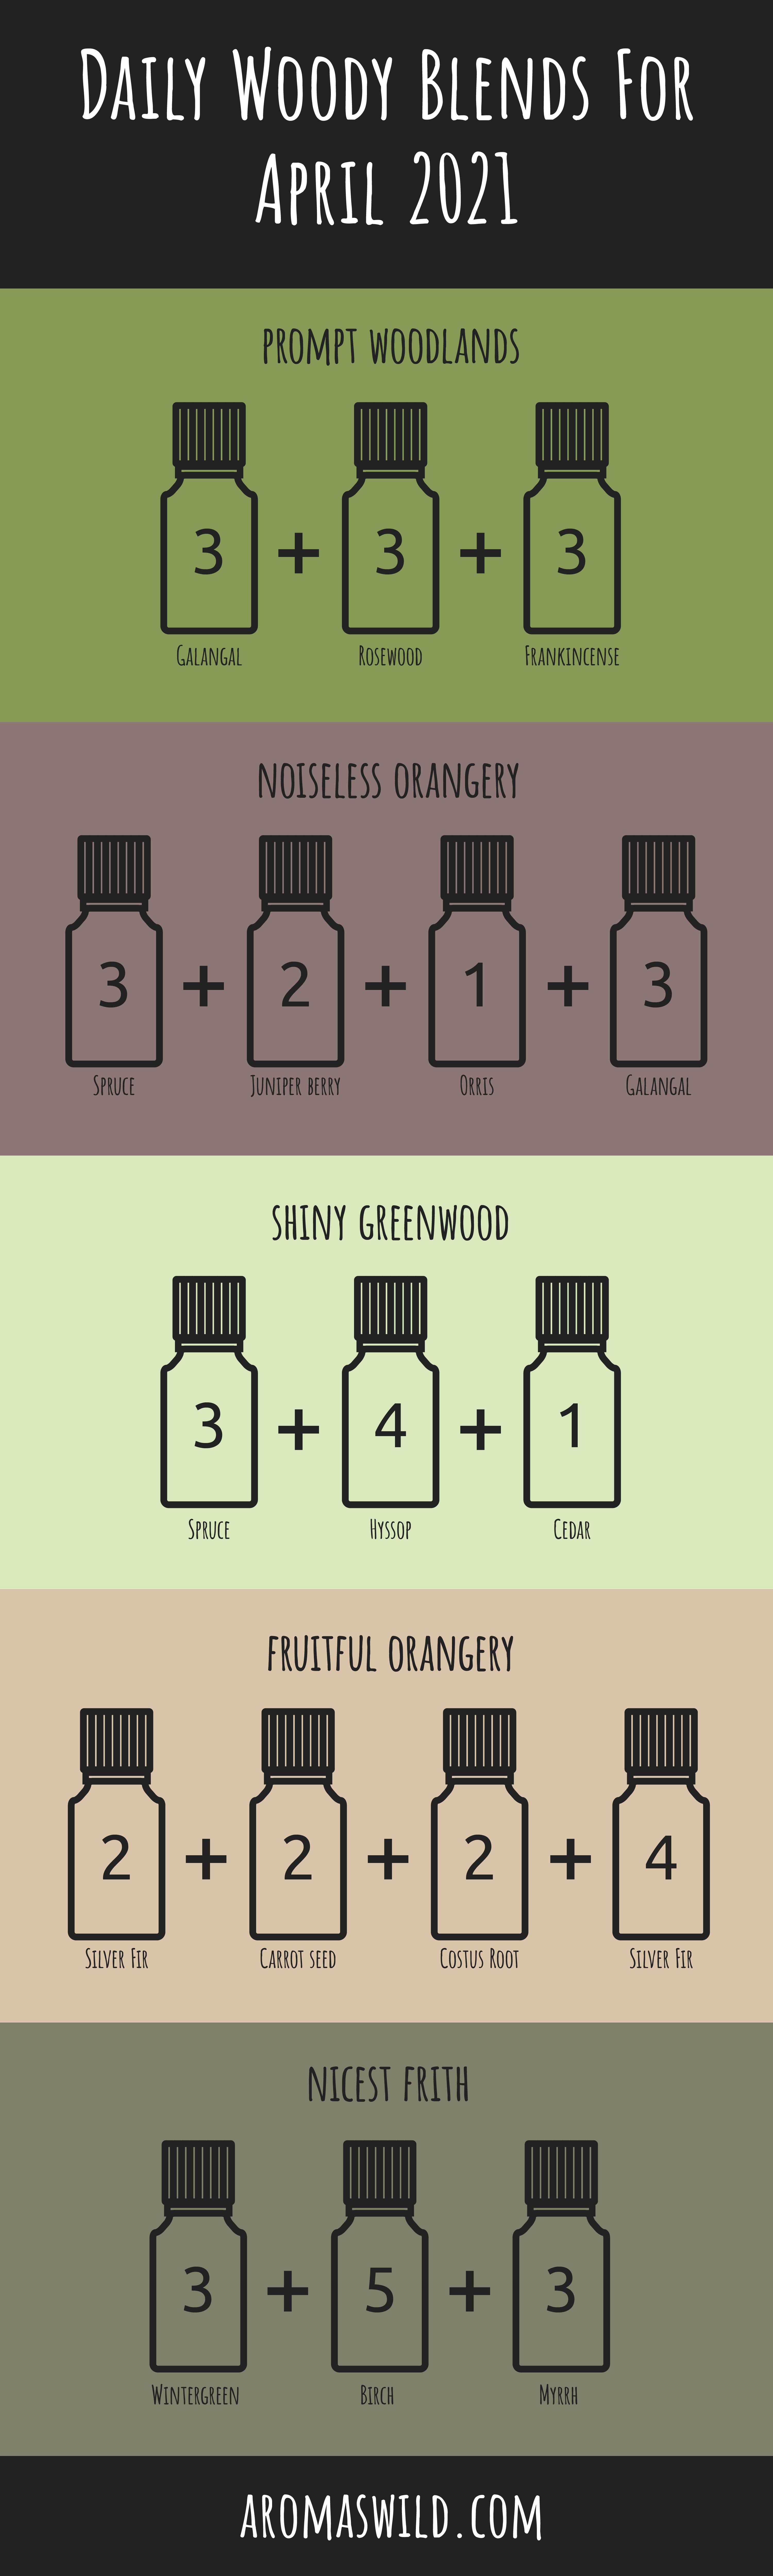 Wood Essential Oil Blends – Daily Woody Blends For 19 April 2021